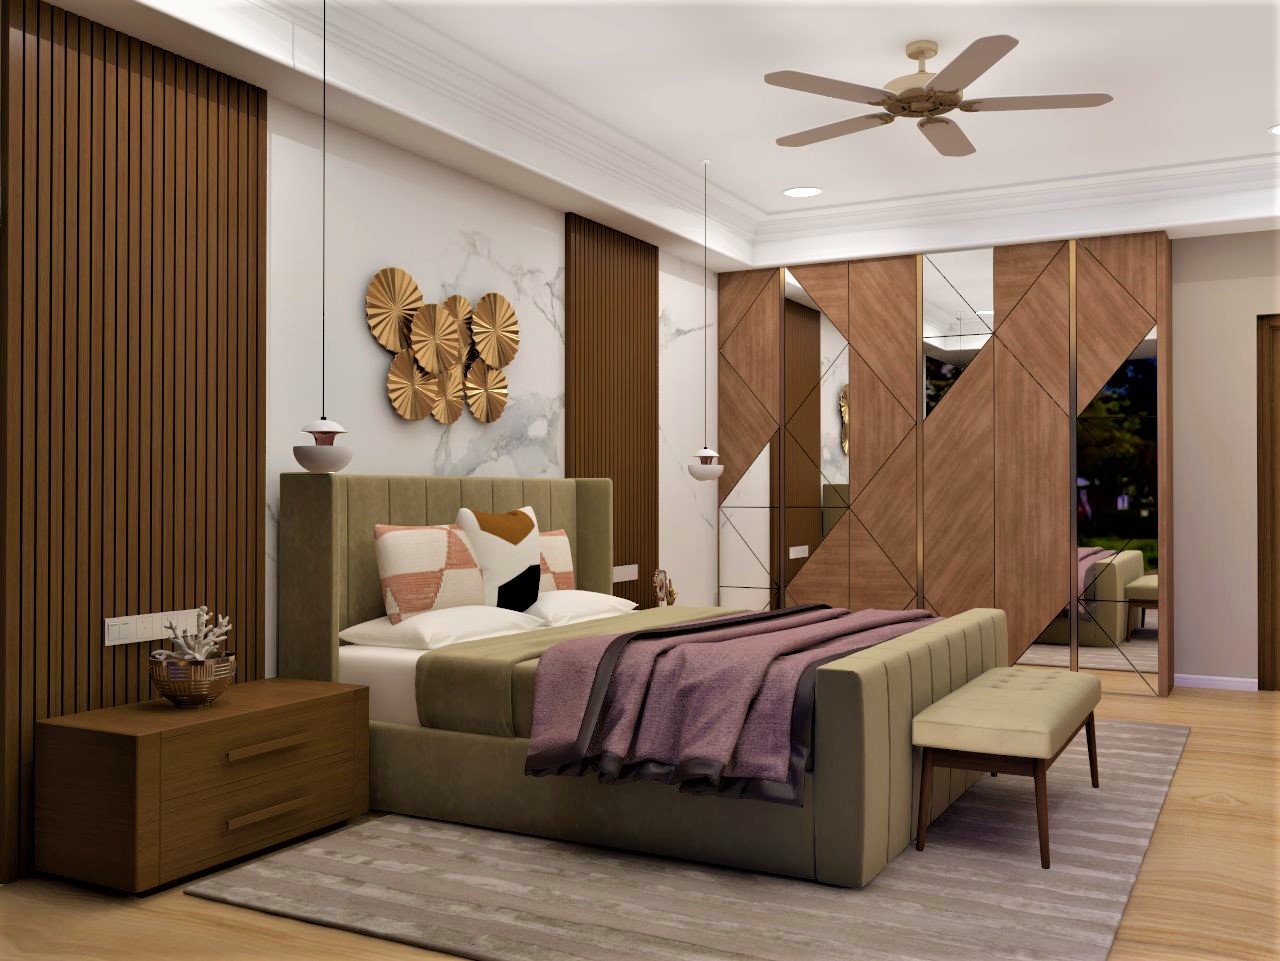 Bedroom design with earthly marble accents and wooden furniture - Beautiful Homes